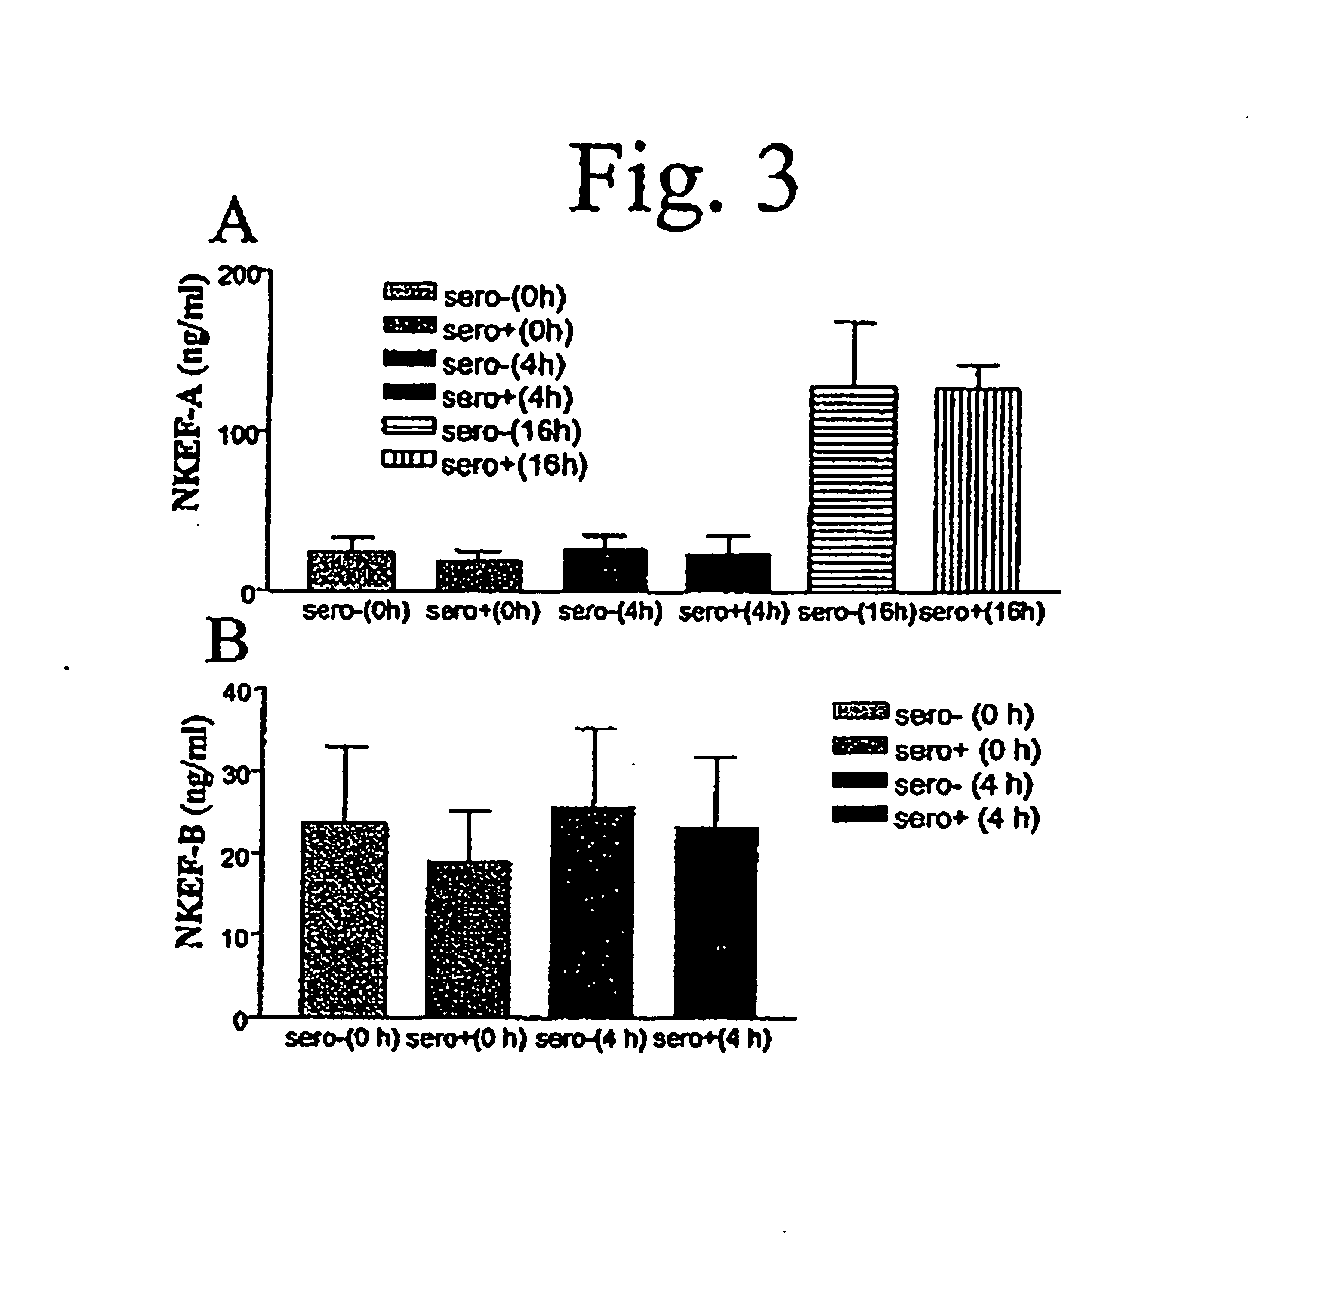 Peroxiredoxin drugs for treatment of hiv-1 infection and methods of use thereof